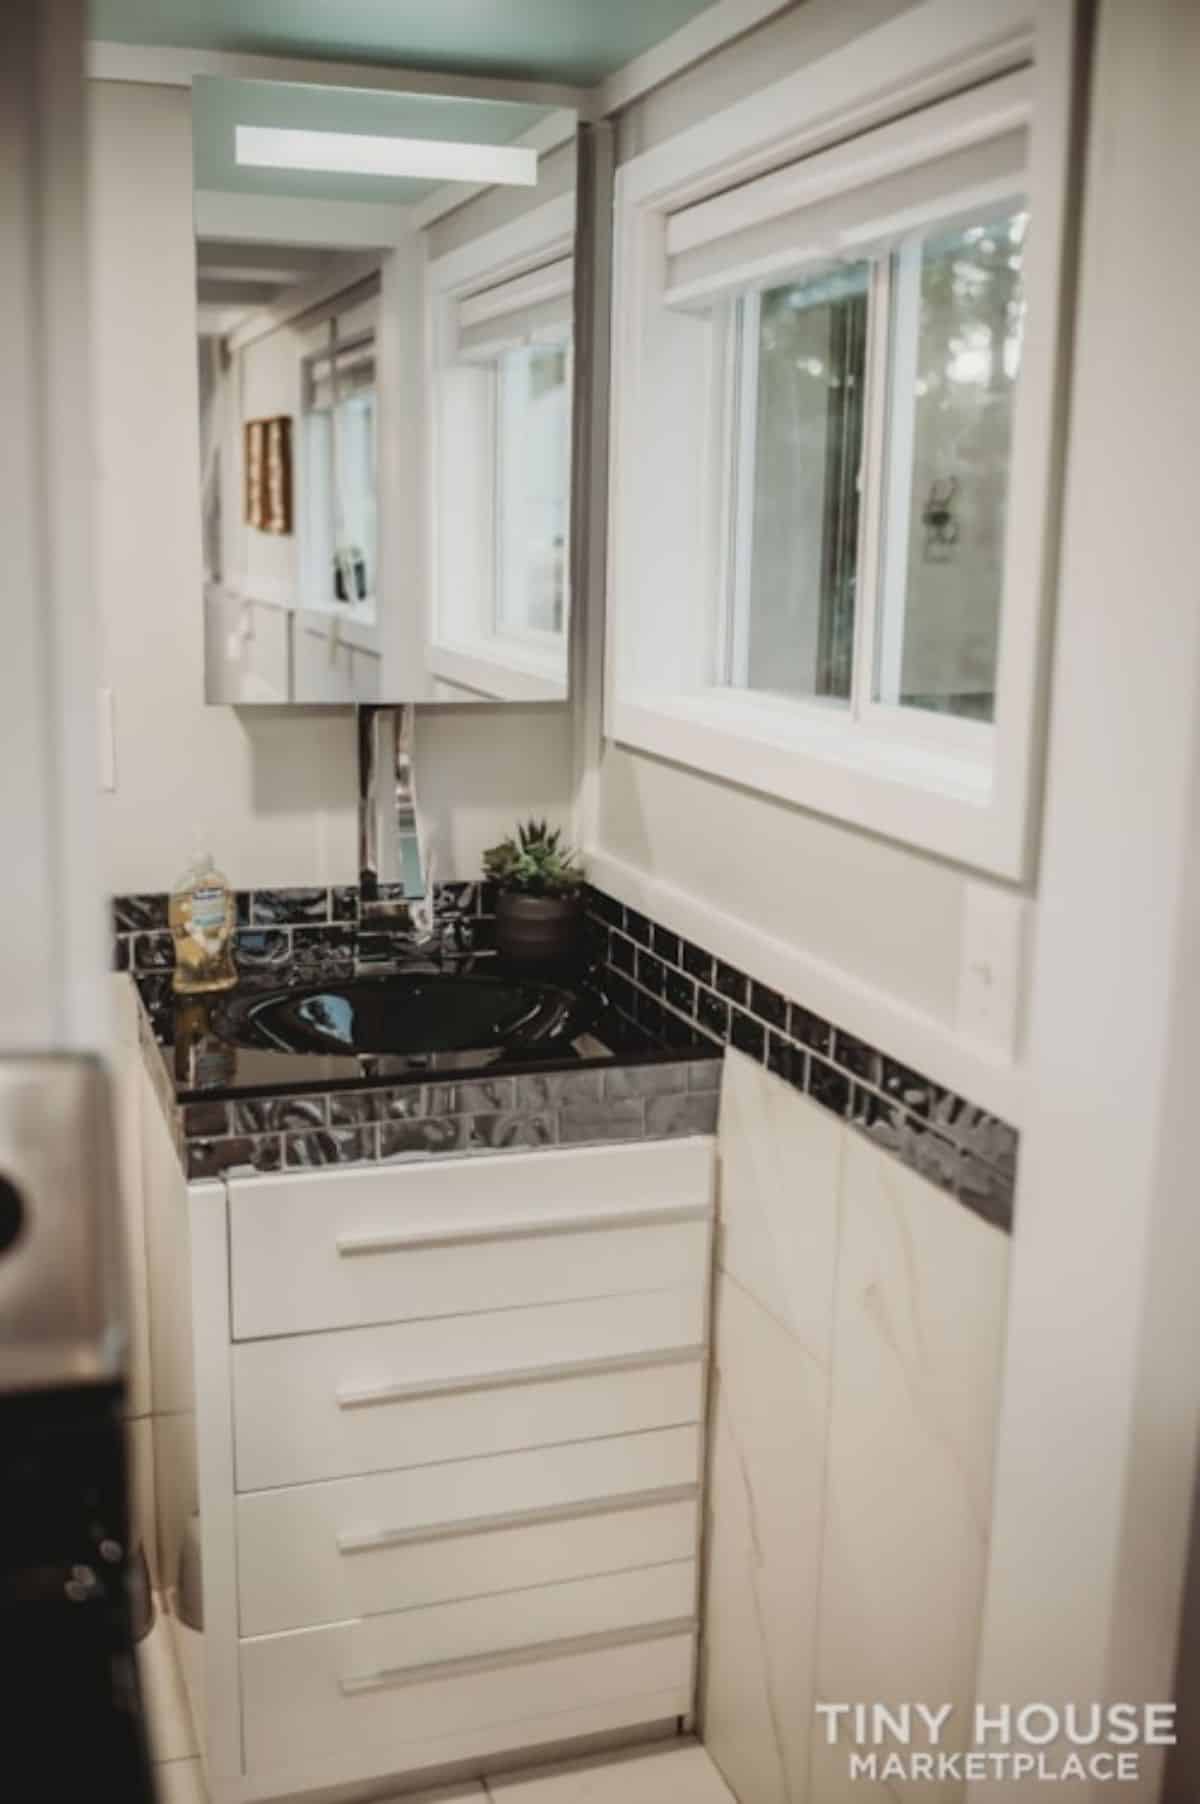 Sink with vanity and mirror in bathroom of 28' Tiny Home on Wheels